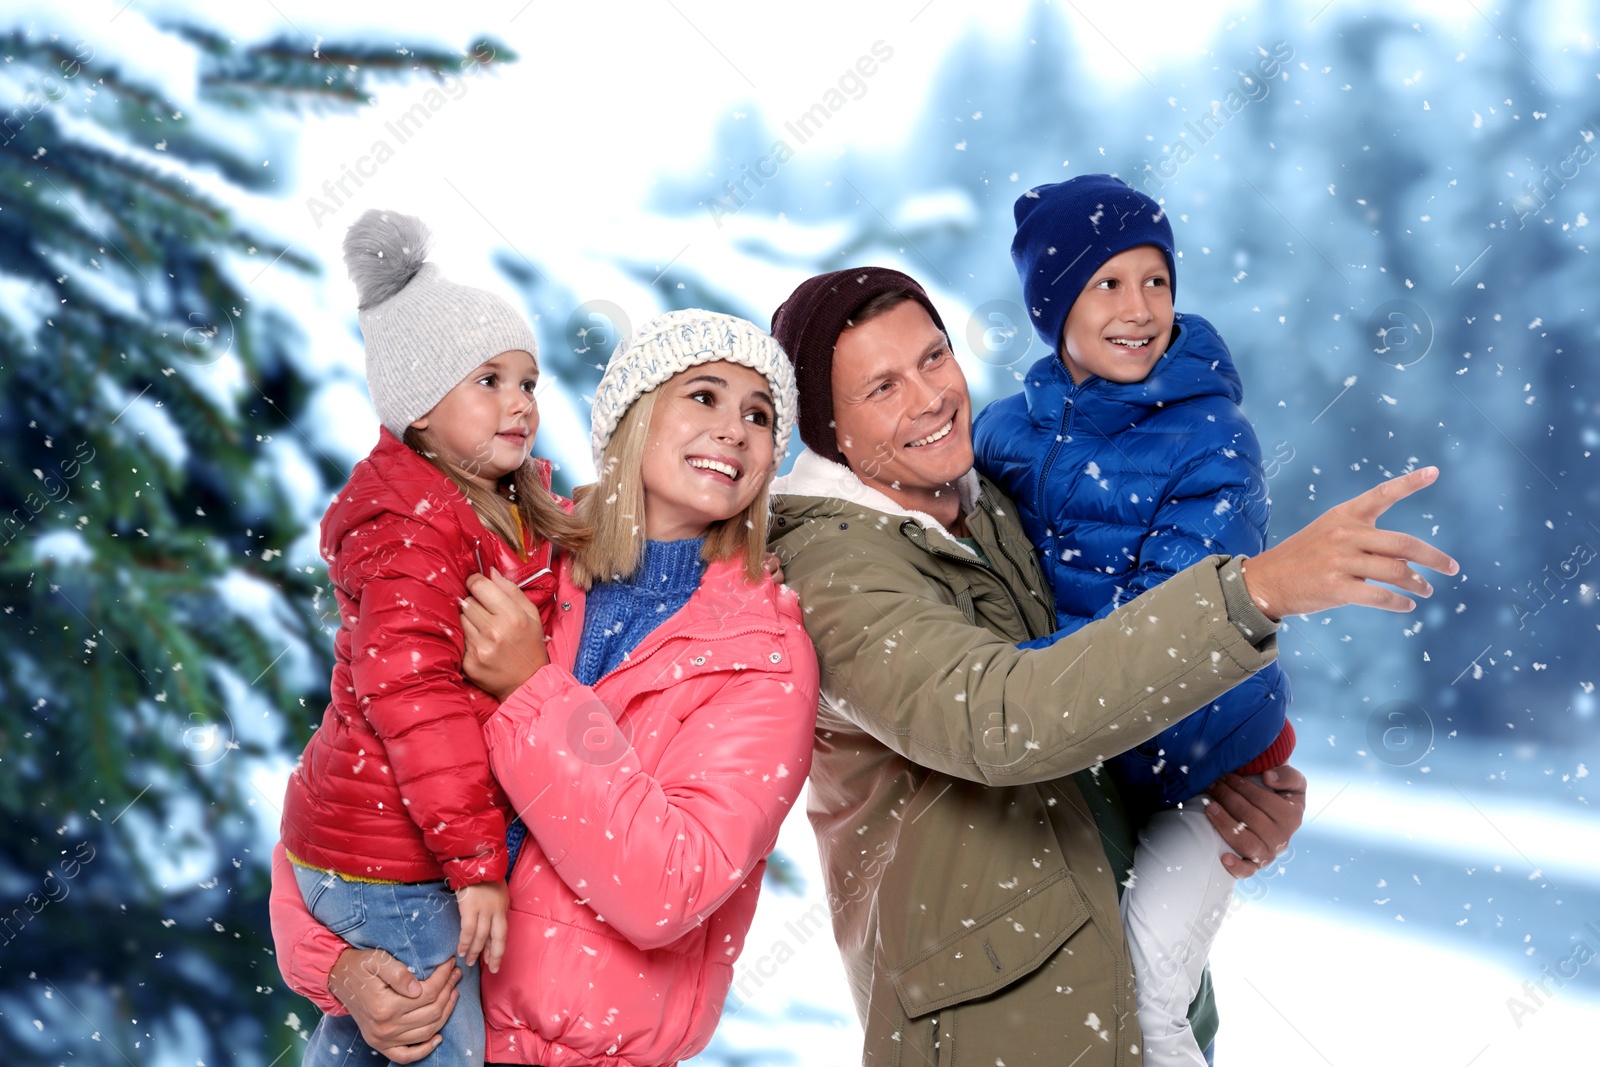 Image of Happy family spending time together near winter forest